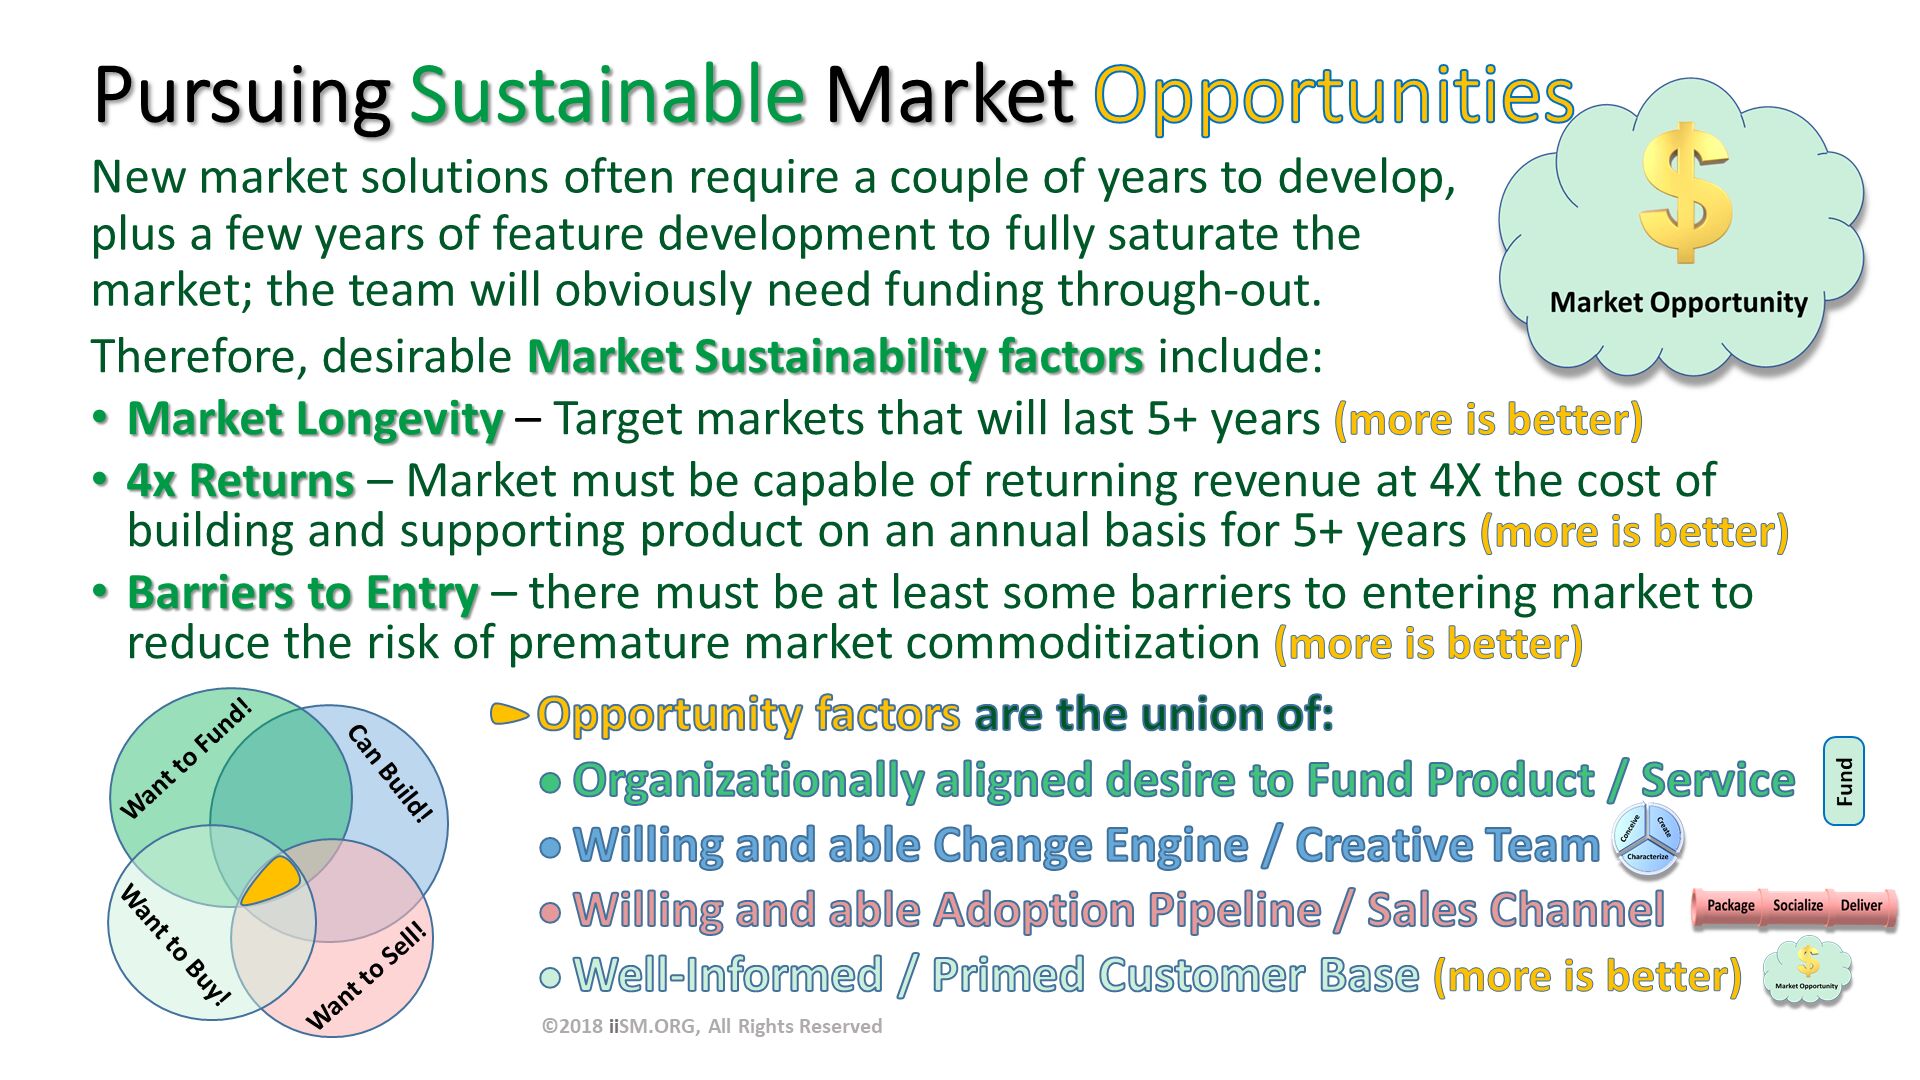 Therefore, desirable Market Sustainability factors include:
Market Longevity – Target markets that will last 5+ years (more is better)
4x Returns – Market must be capable of returning revenue at 4X the cost of building and supporting product on an annual basis for 5+ years (more is better)
Barriers to Entry – there must be at least some barriers to entering market to reduce the risk of premature market commoditization (more is better)
. Pursuing Sustainable Market Opportunities. New market solutions often require a couple of years to develop, plus a few years of feature development to fully saturate the market; the team will obviously need funding through-out. . ©2018 iiSM.ORG, All Rights Reserved. Fund. 